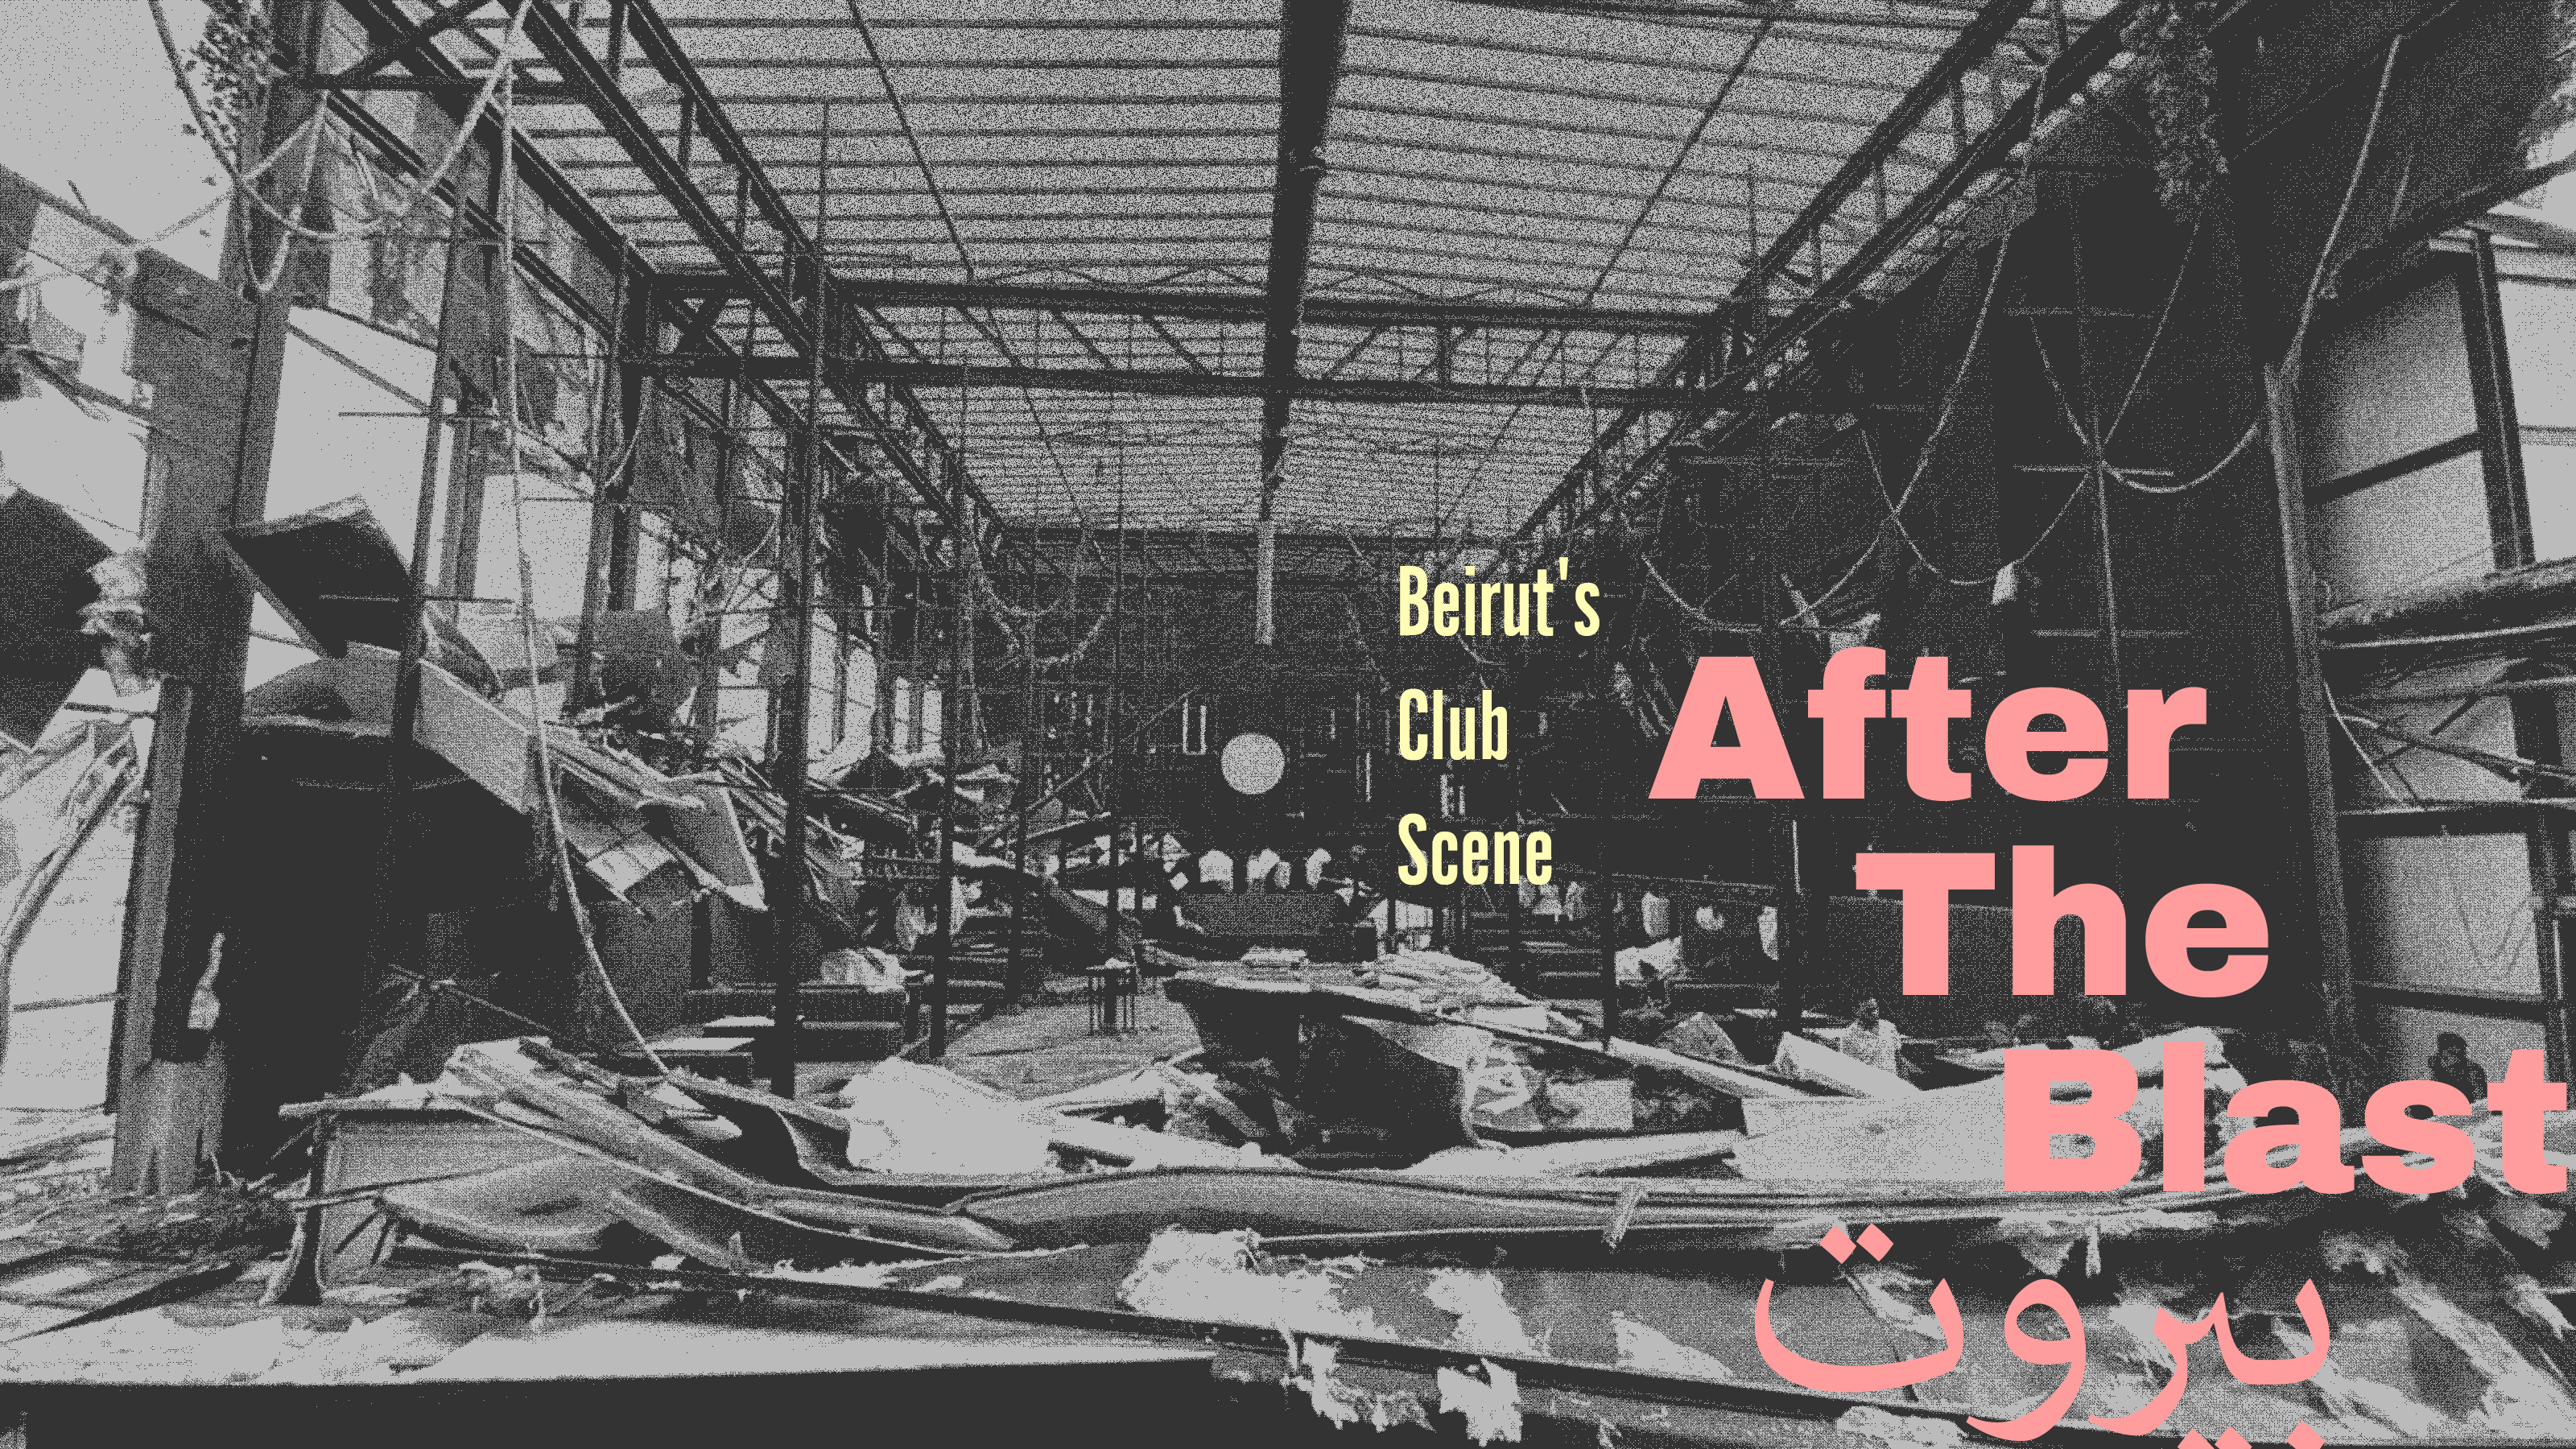 Beirut's Club Scene After The Blast